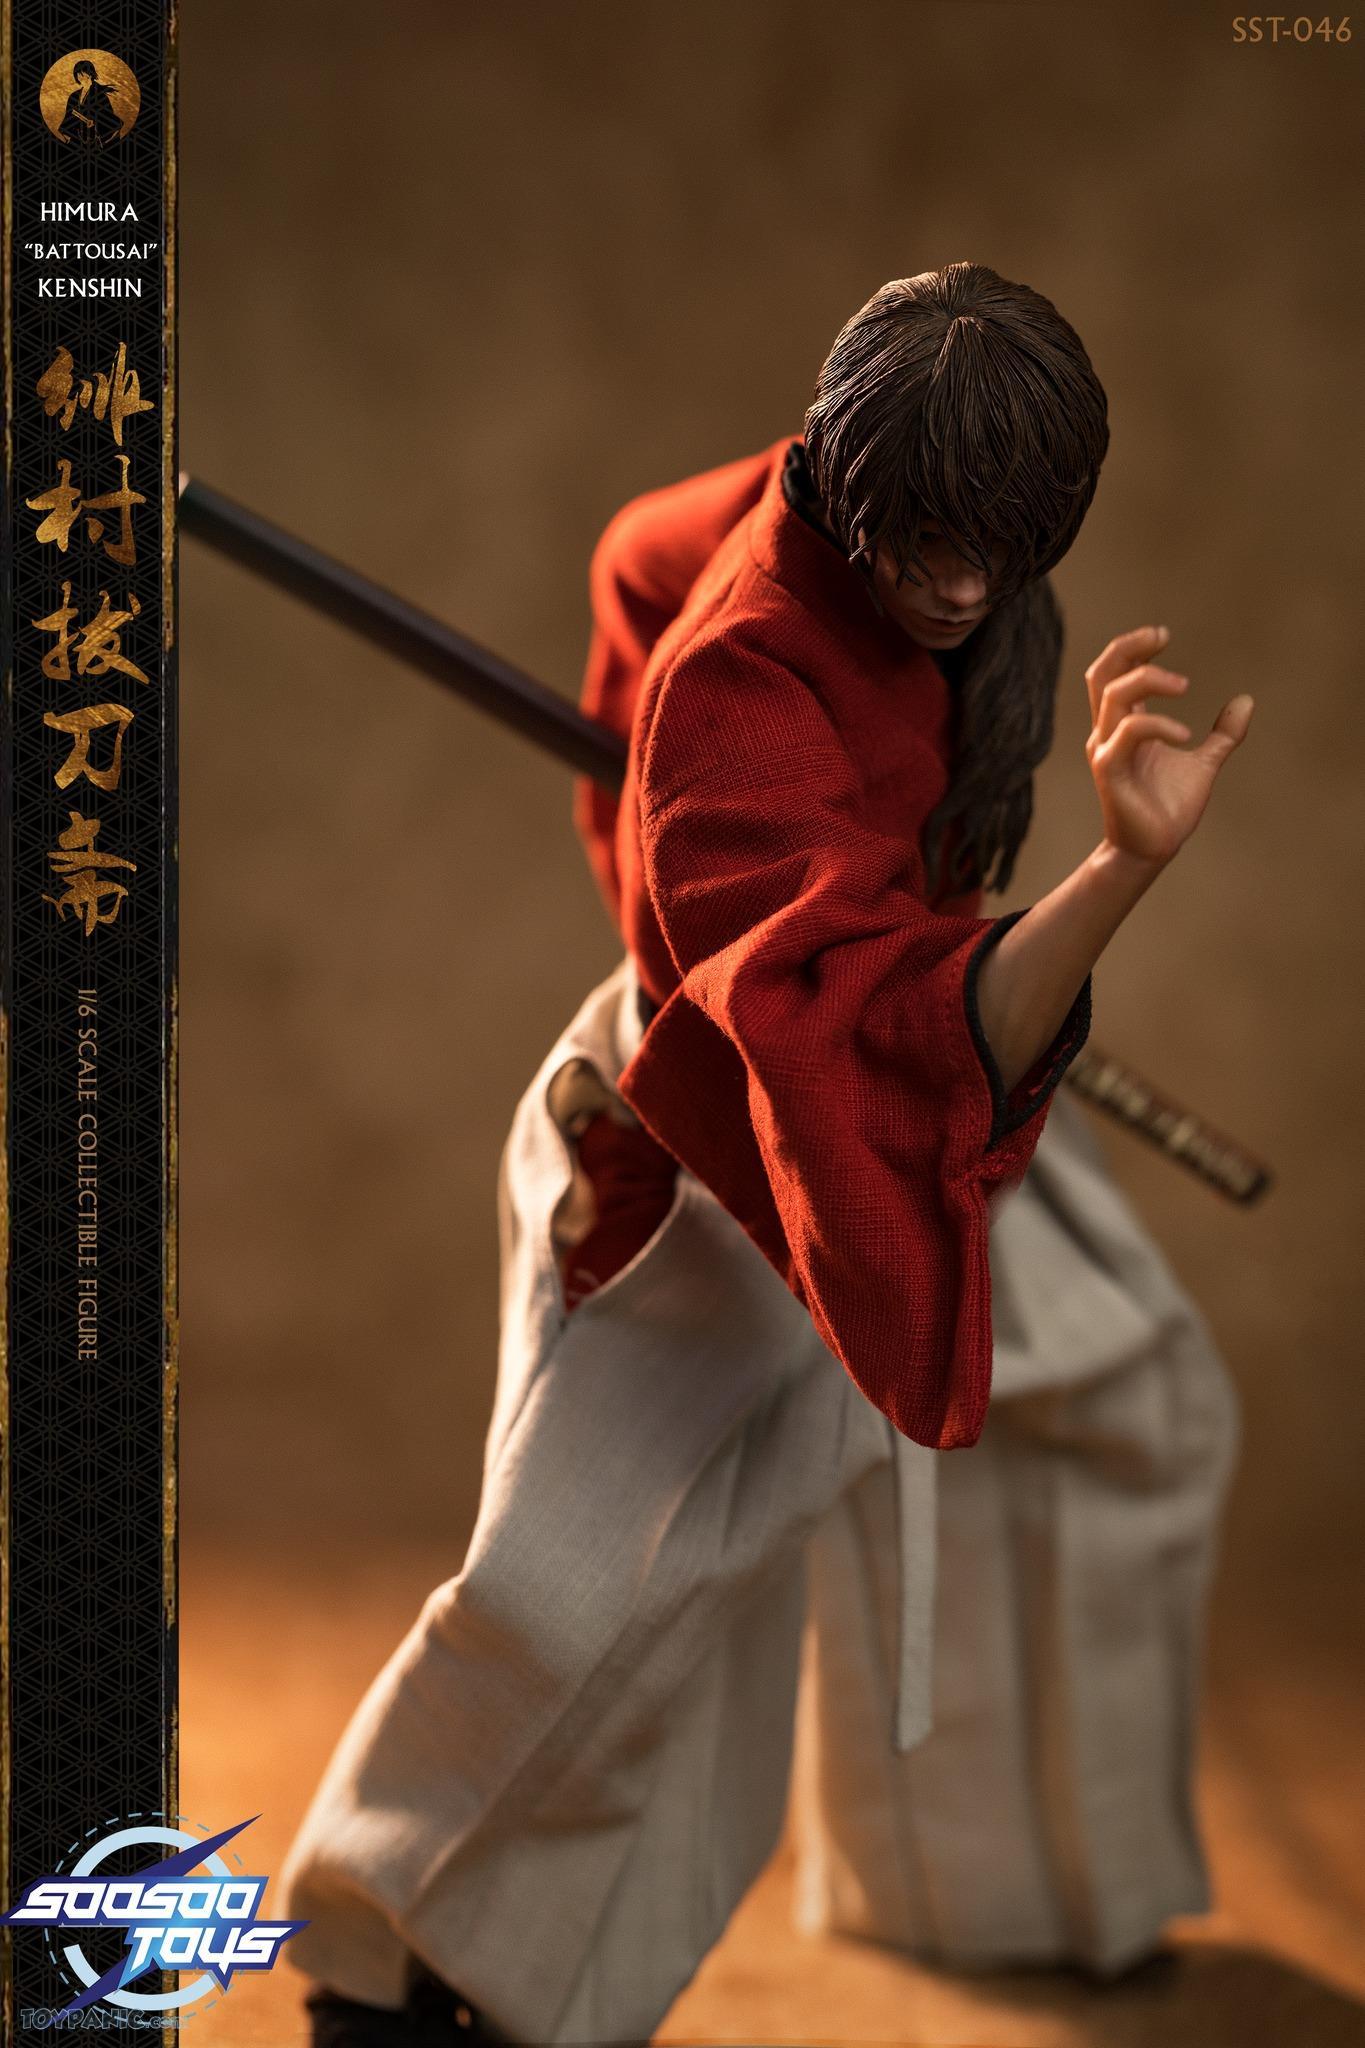 himura - NEW PRODUCT: 1/6 scale Rurouni Kenshin Collectible Figure from SooSooToys 712202251233PM_9601394